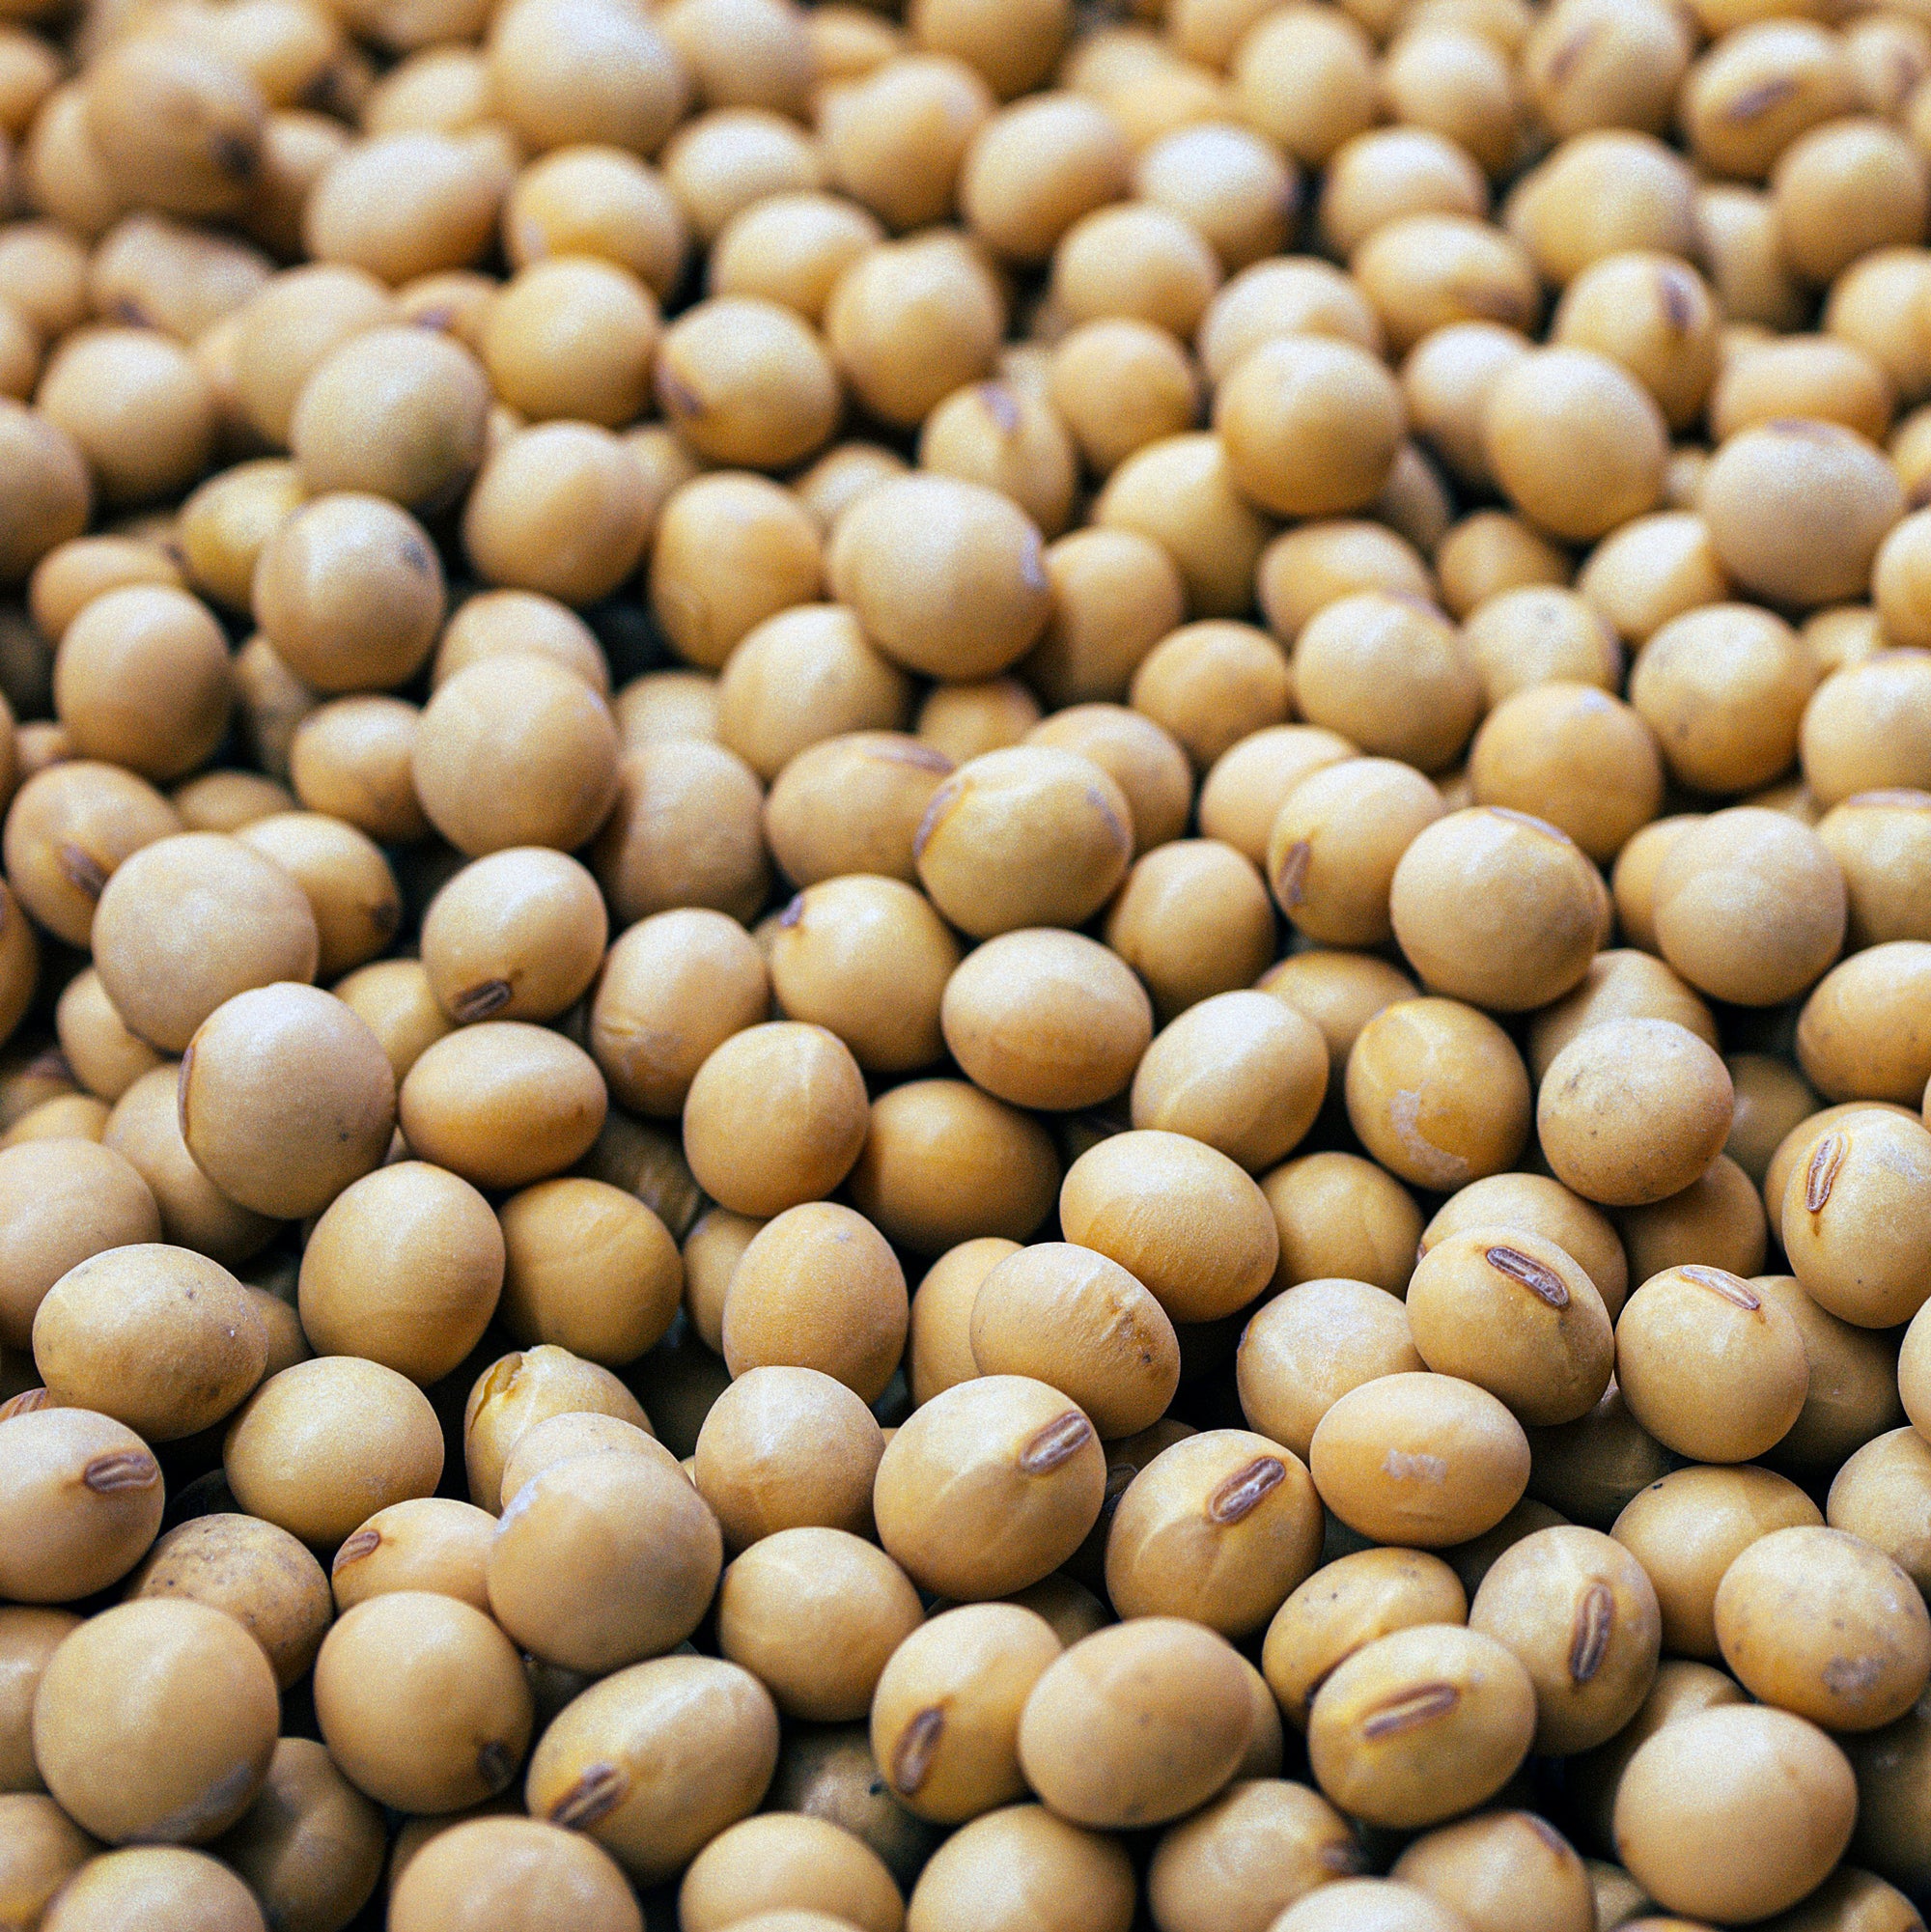 A close-up view of a large pile of soybeans. The image shows numerous round, tan-colored soybeans with a smooth texture, packed closely together, filling the entire frame.